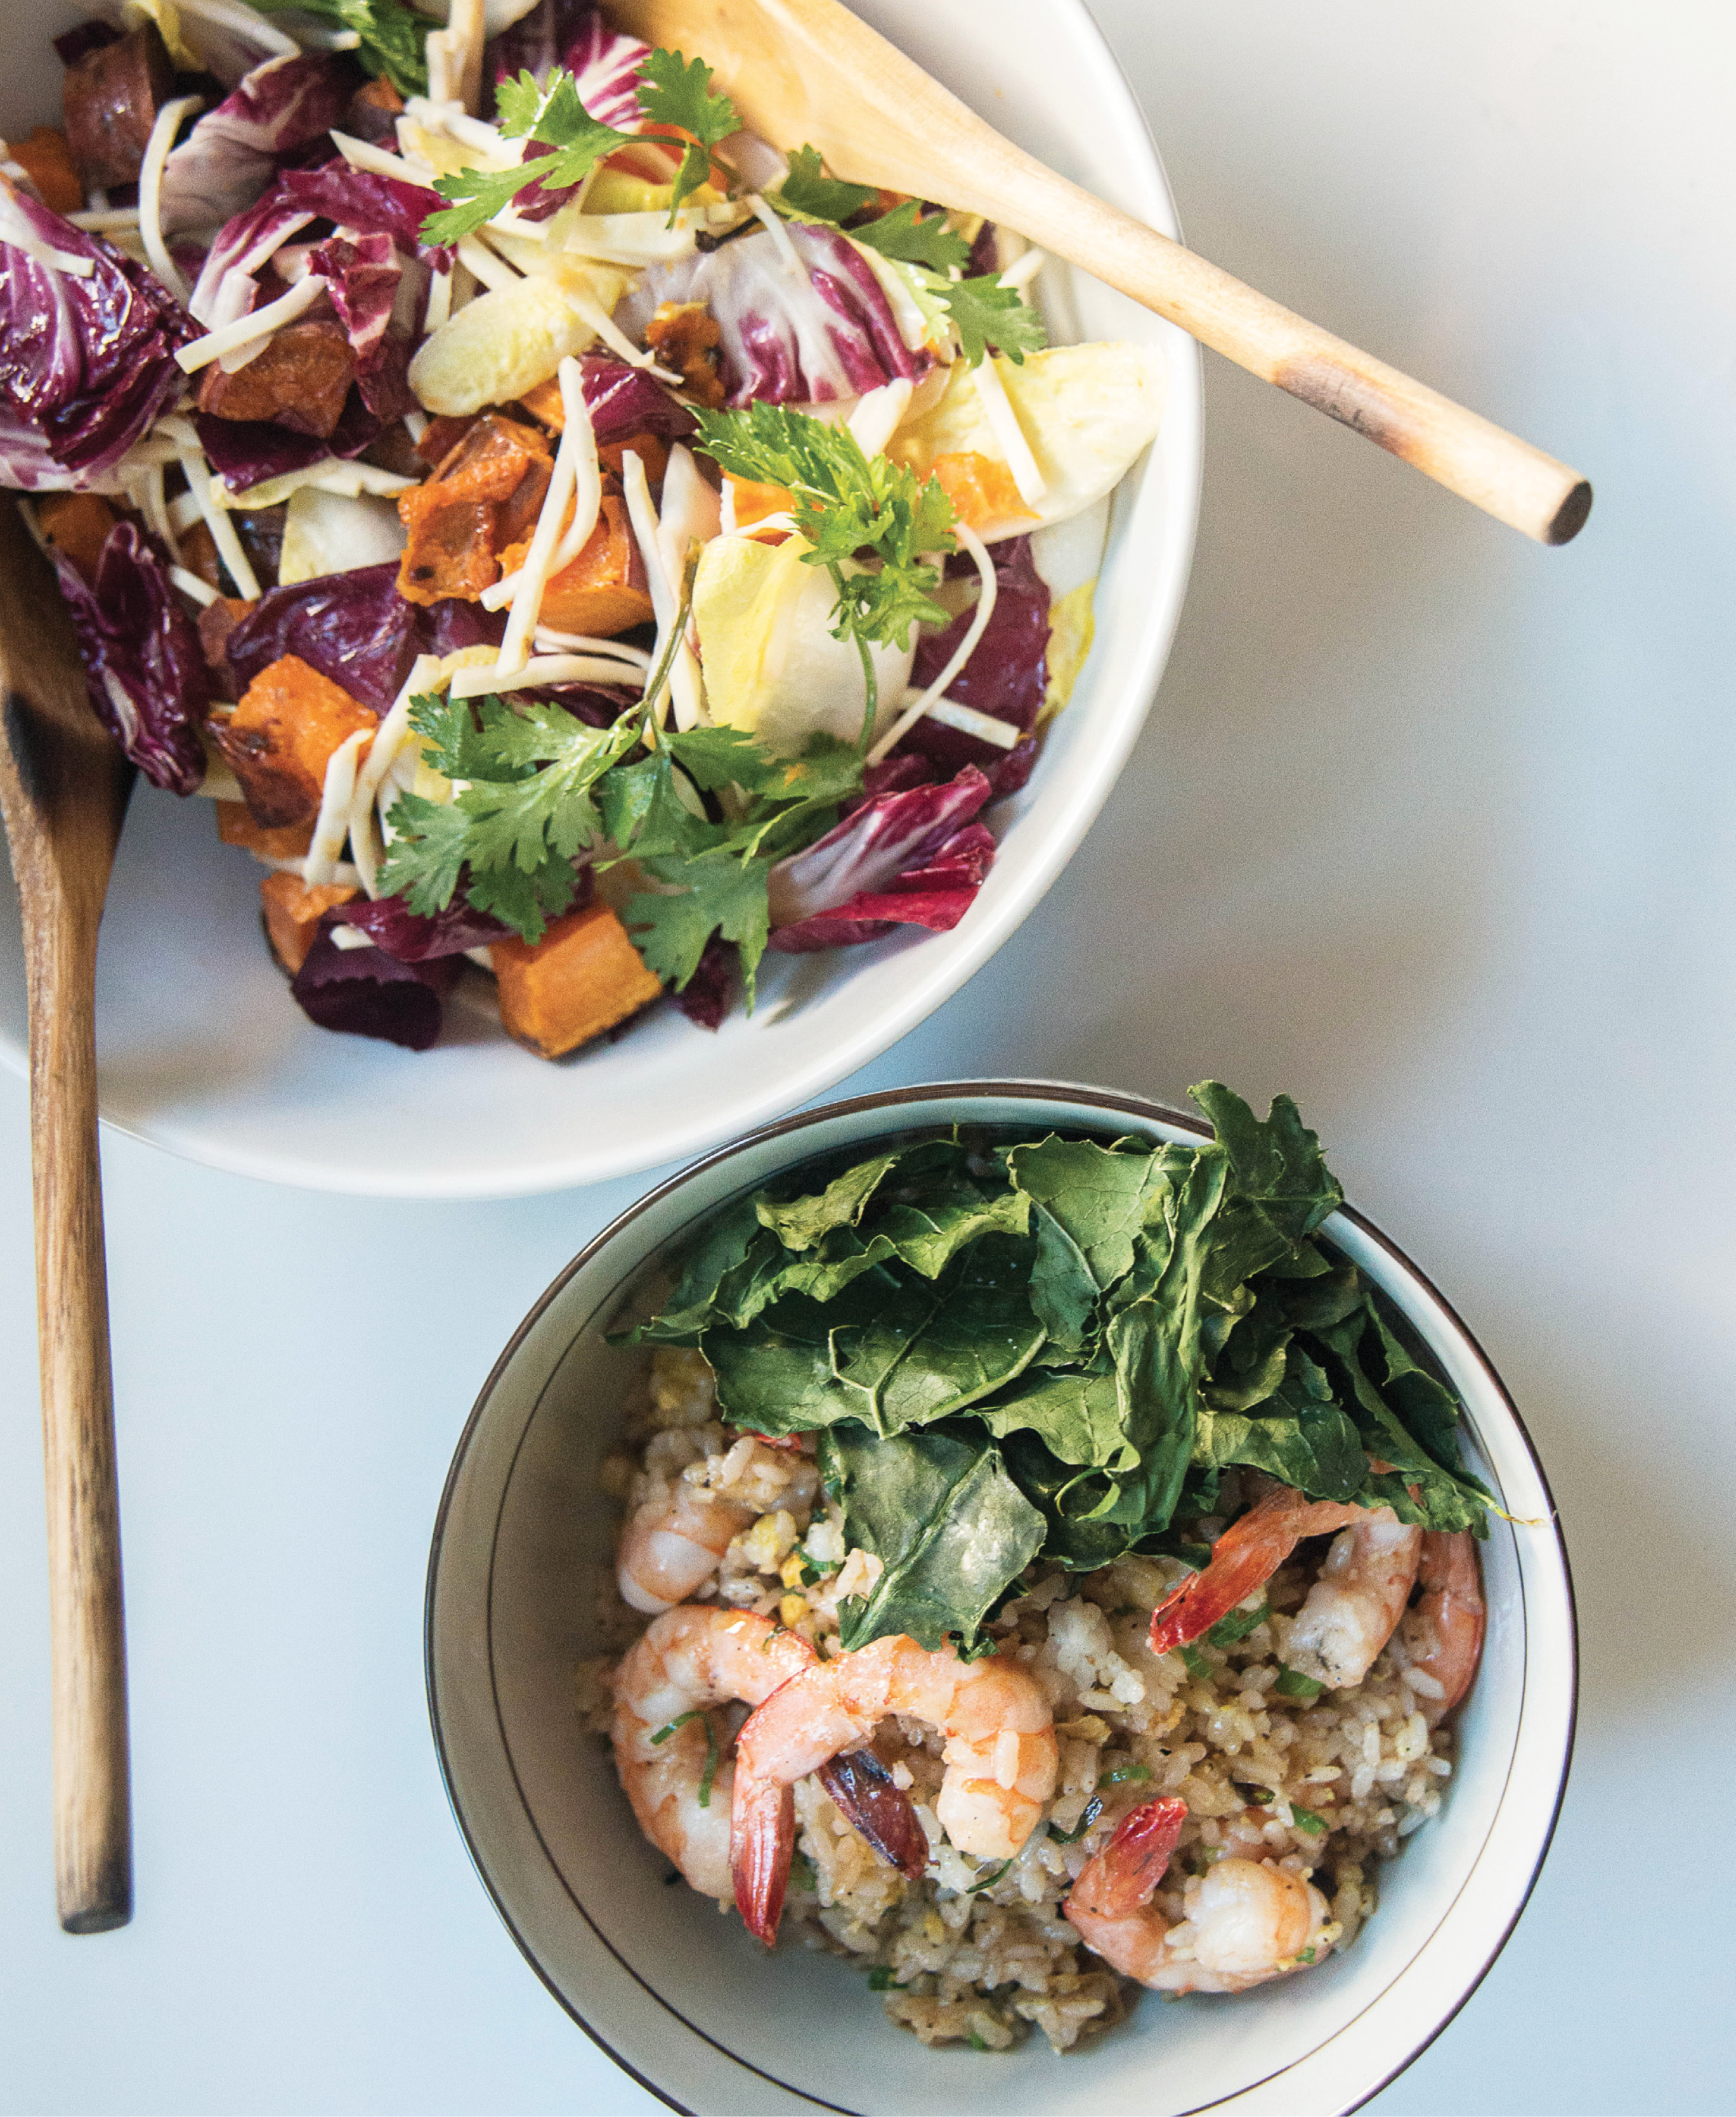 Bowls of the celery root and sweet potato salad and shrimp fried rice; Walker and Li top the rice with crispy baked kale, a healthier alternative to deep- fried garnishes.